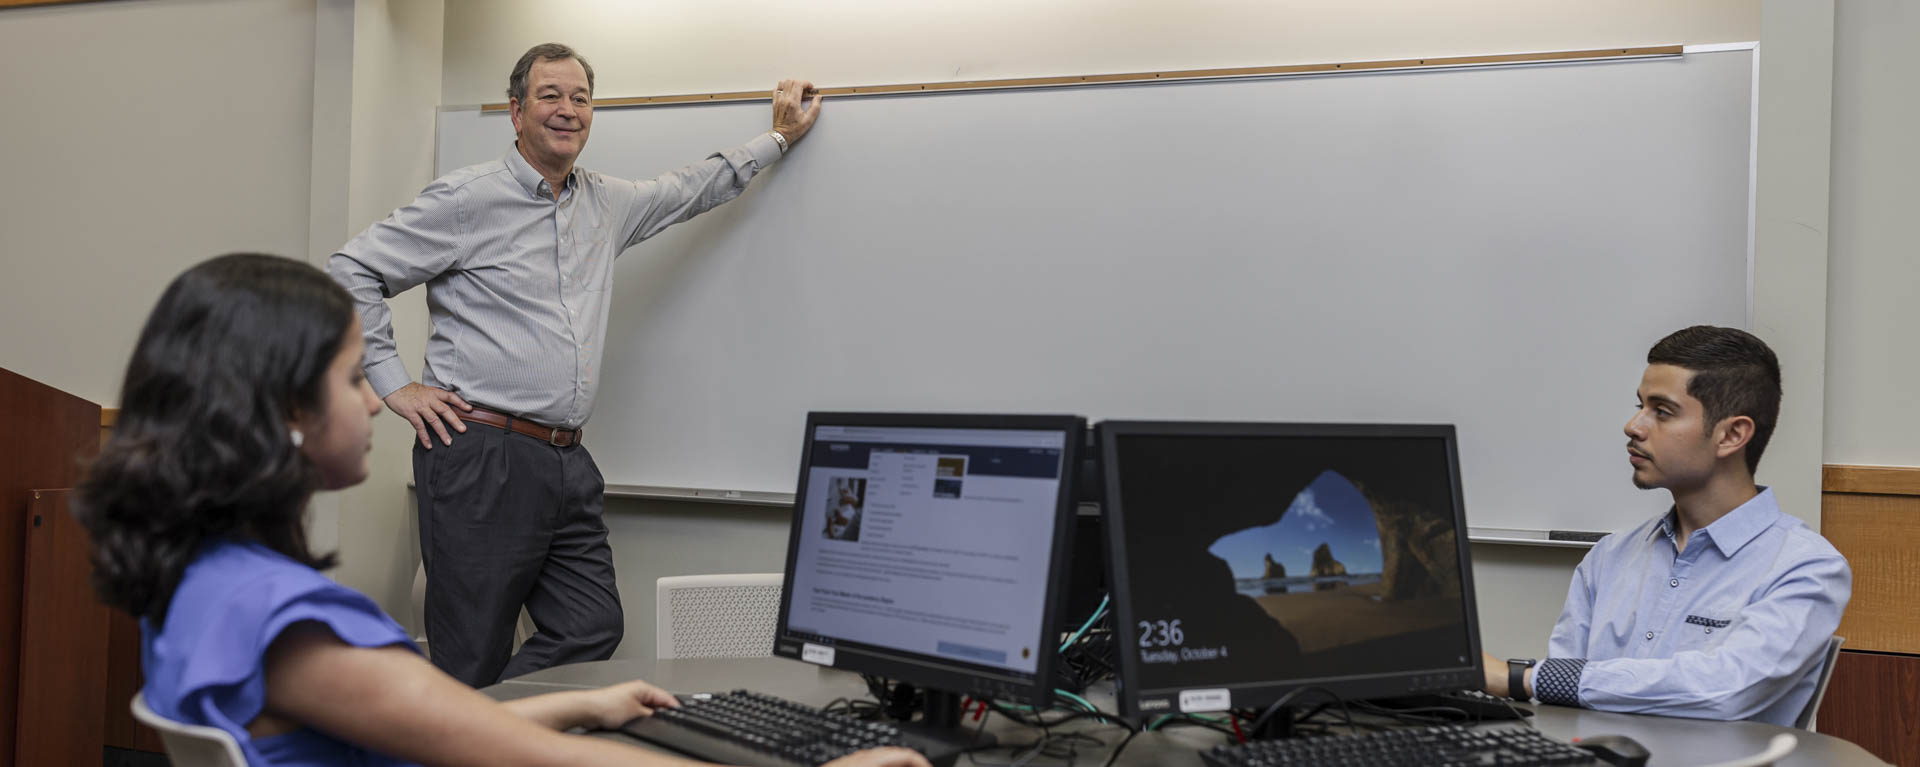 A business professor stands at a white board while talking with students.